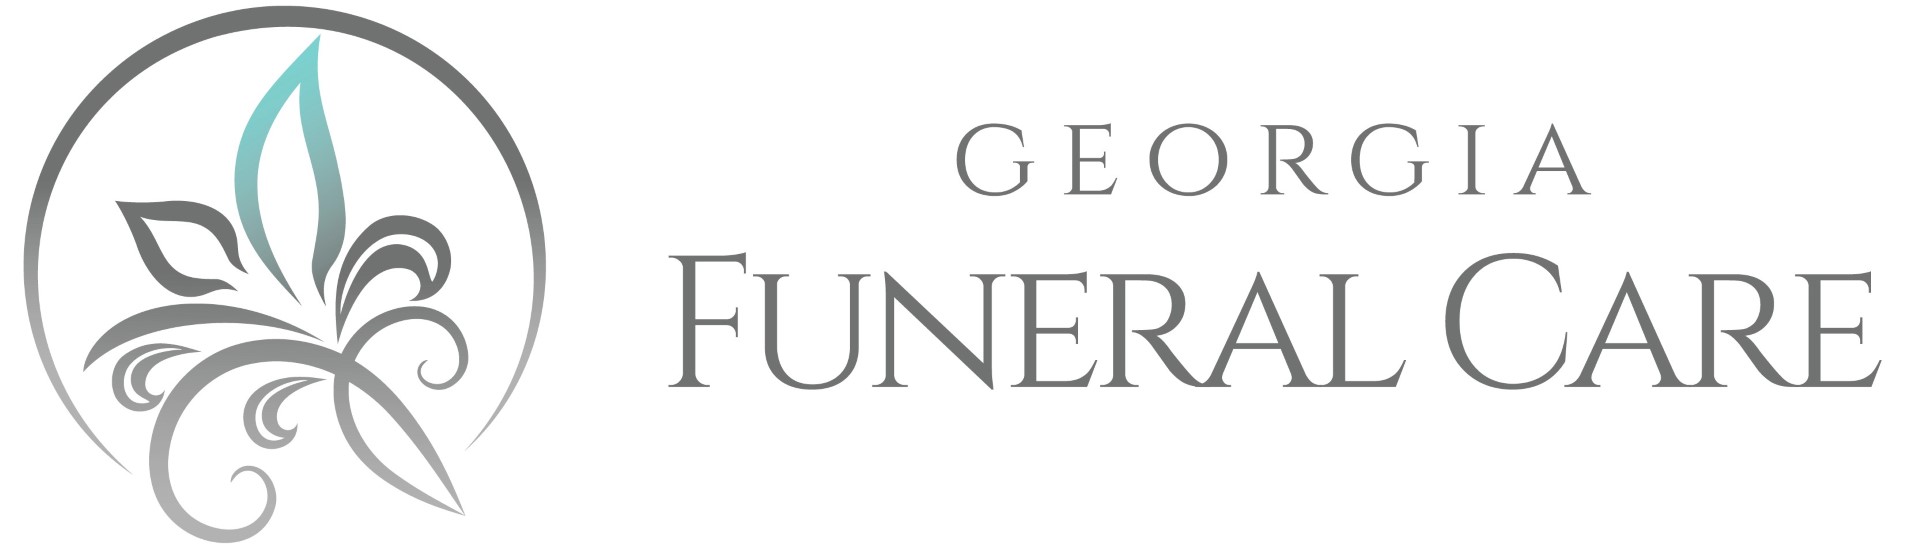 Acworth Funeral Homes and Funeral Homes Near Kennesaw 30144